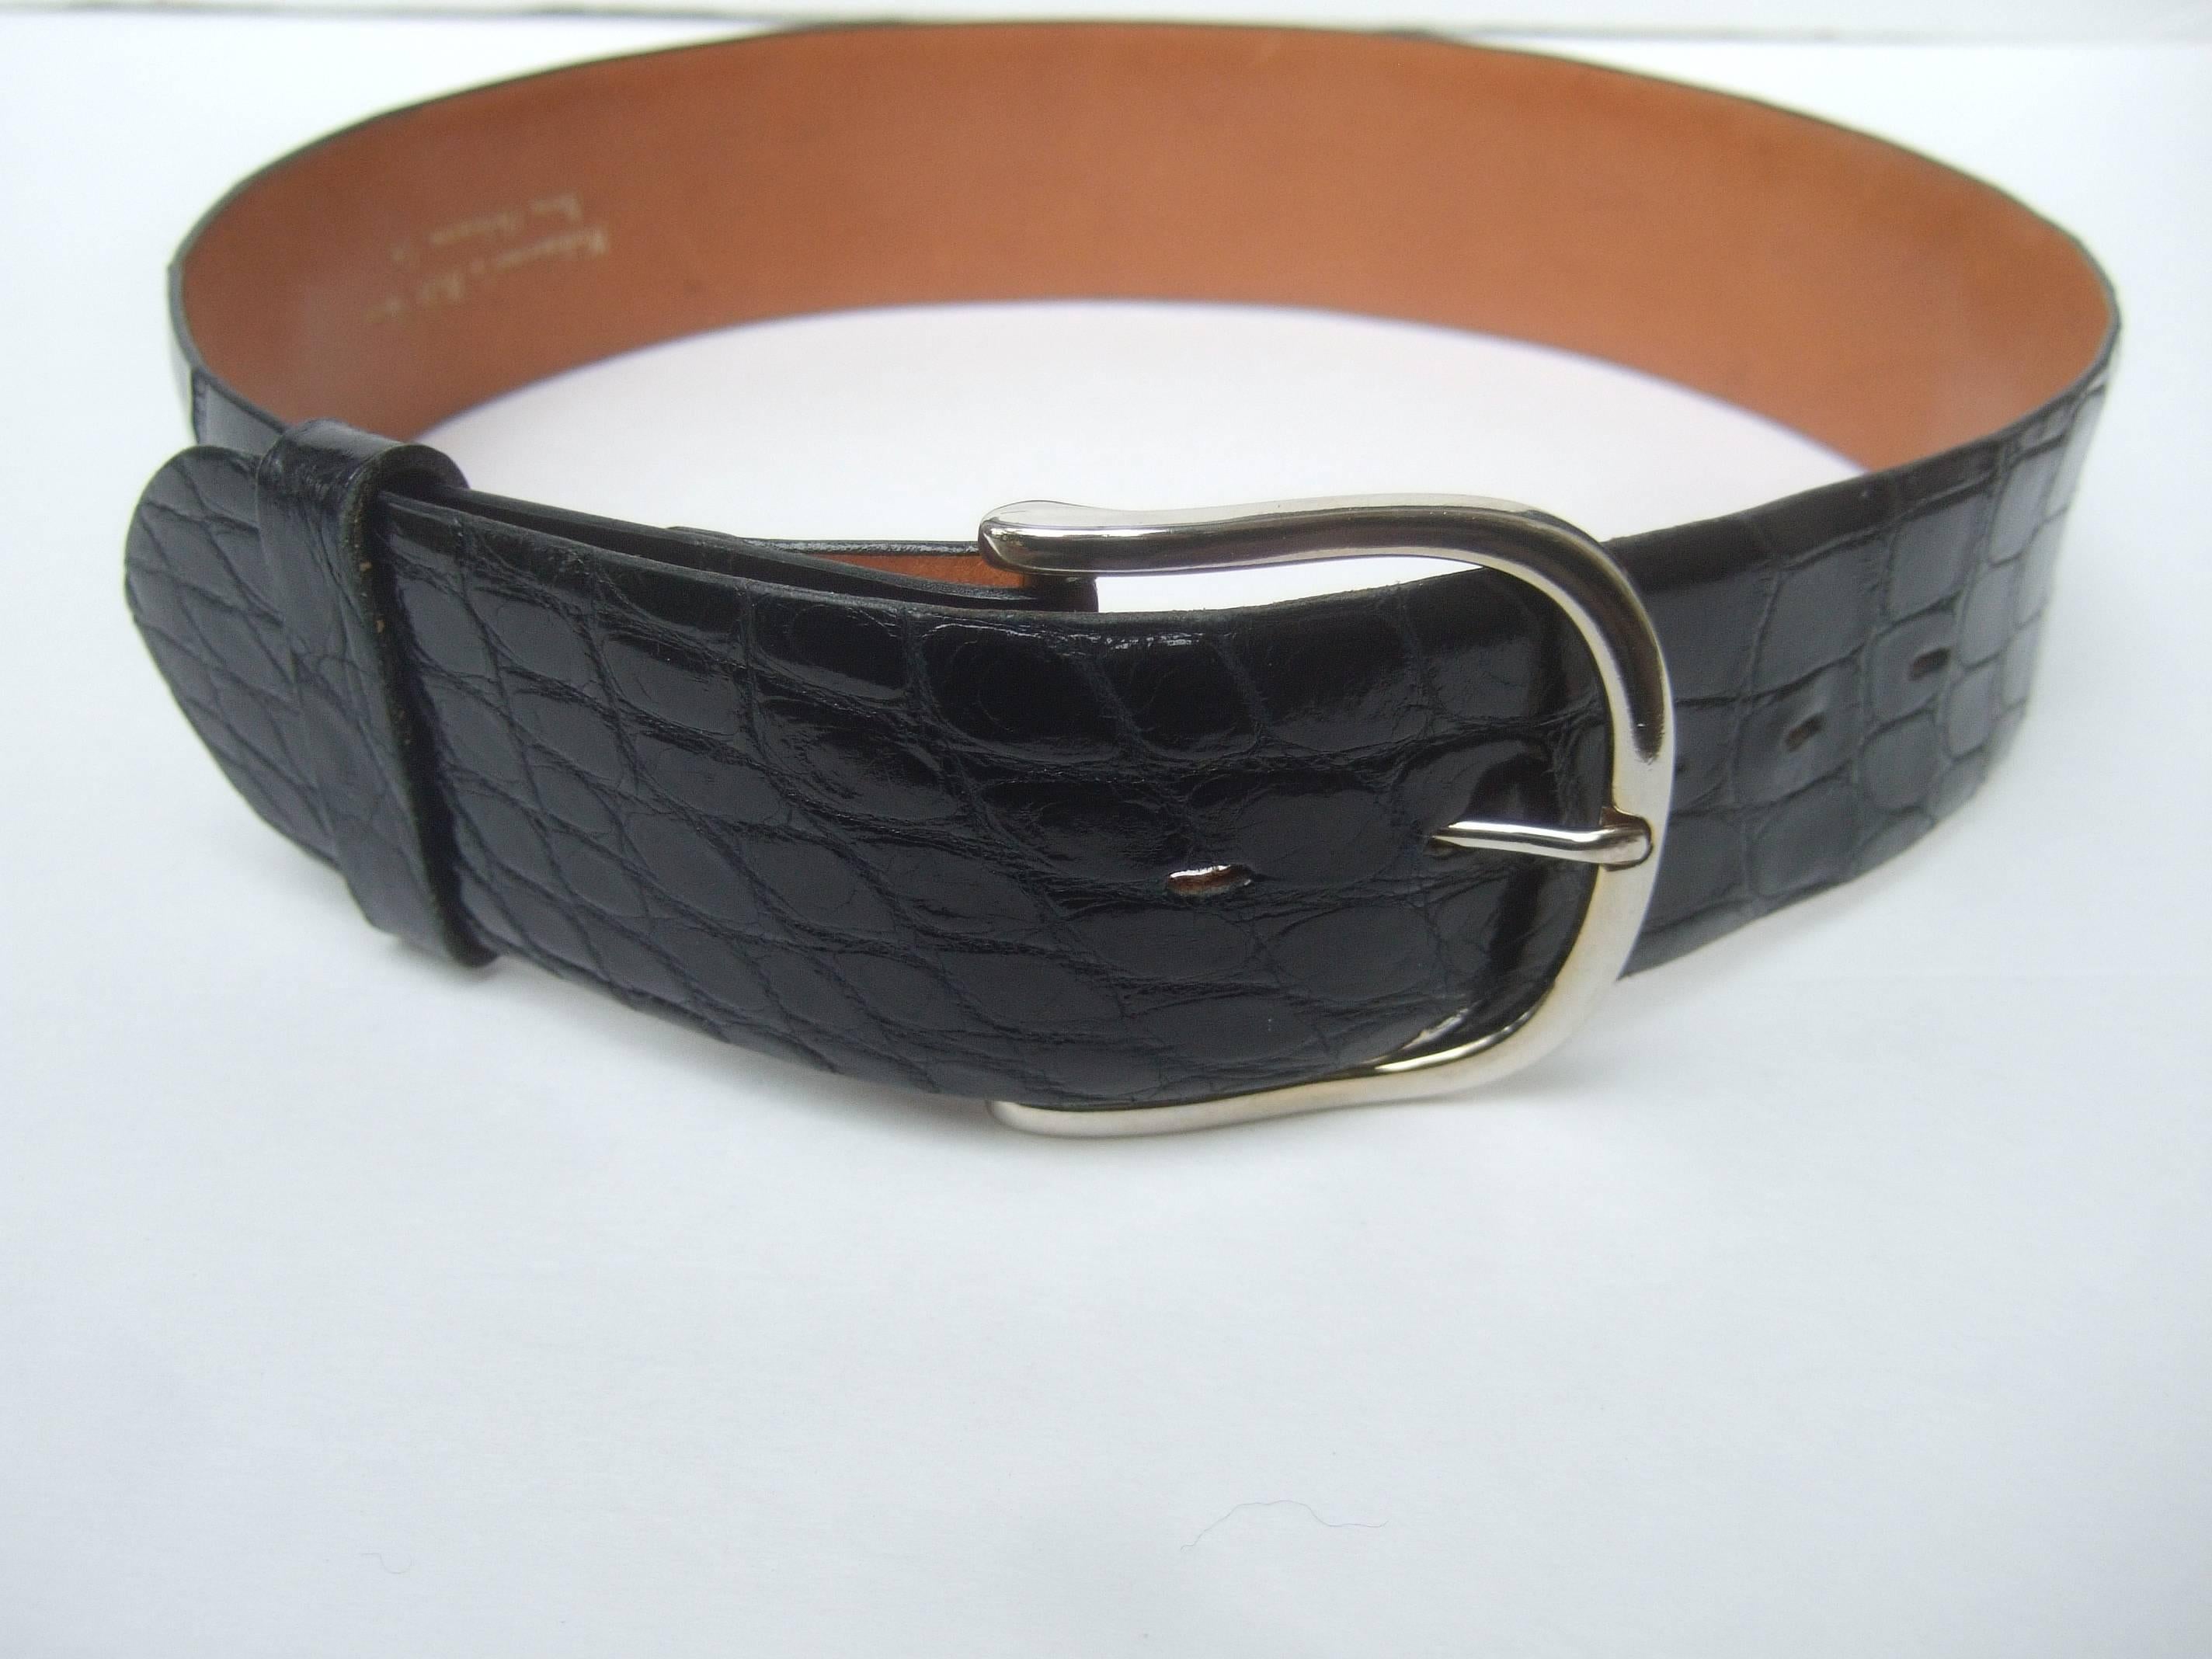 Exotic ebony genuine alligator women's belt ca. 1980s
The sleek wide black reptile leather belt is 
adorned with a large chrome metal buckle

The classic high fashion reptile skin belt makes
a very chic accessory

Stamped Genuine Alligator